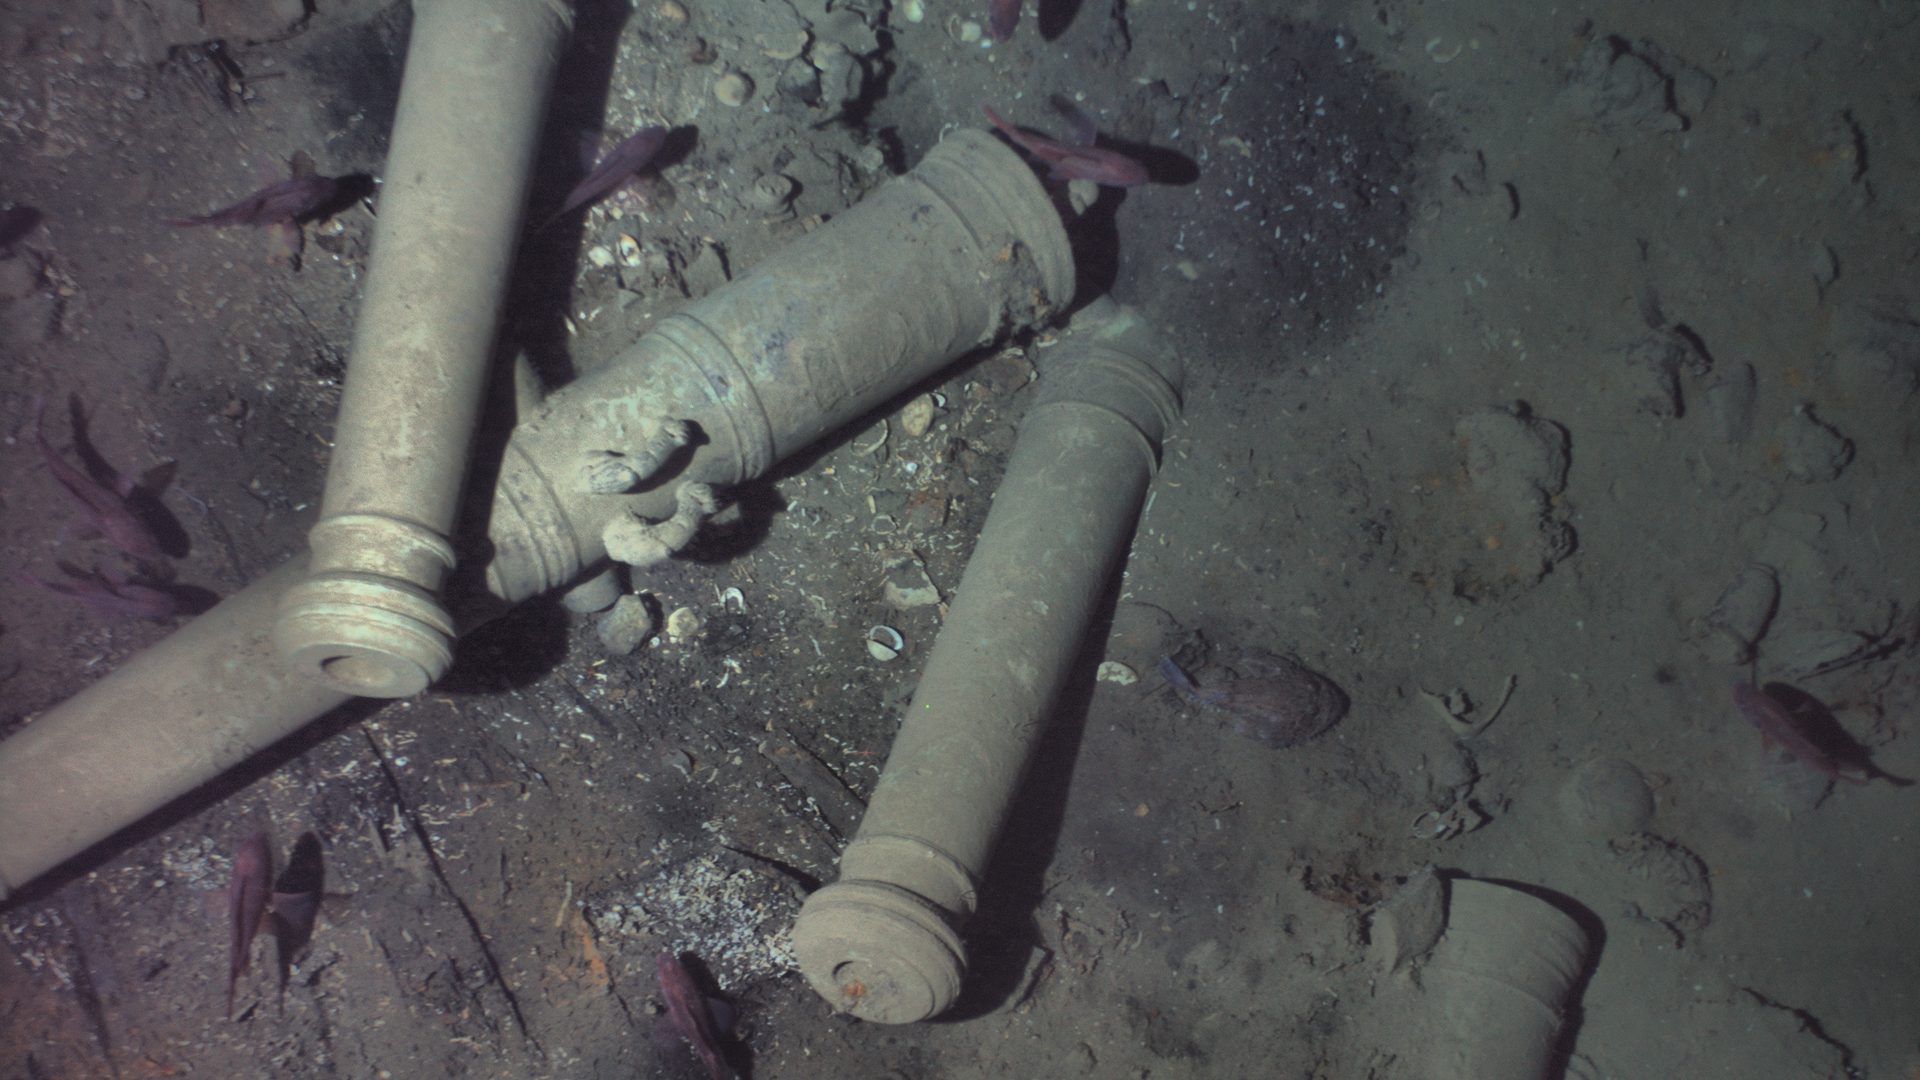 Image from an autonomous underwater vehicle, showing the wreckage of the San Jose's cannons.